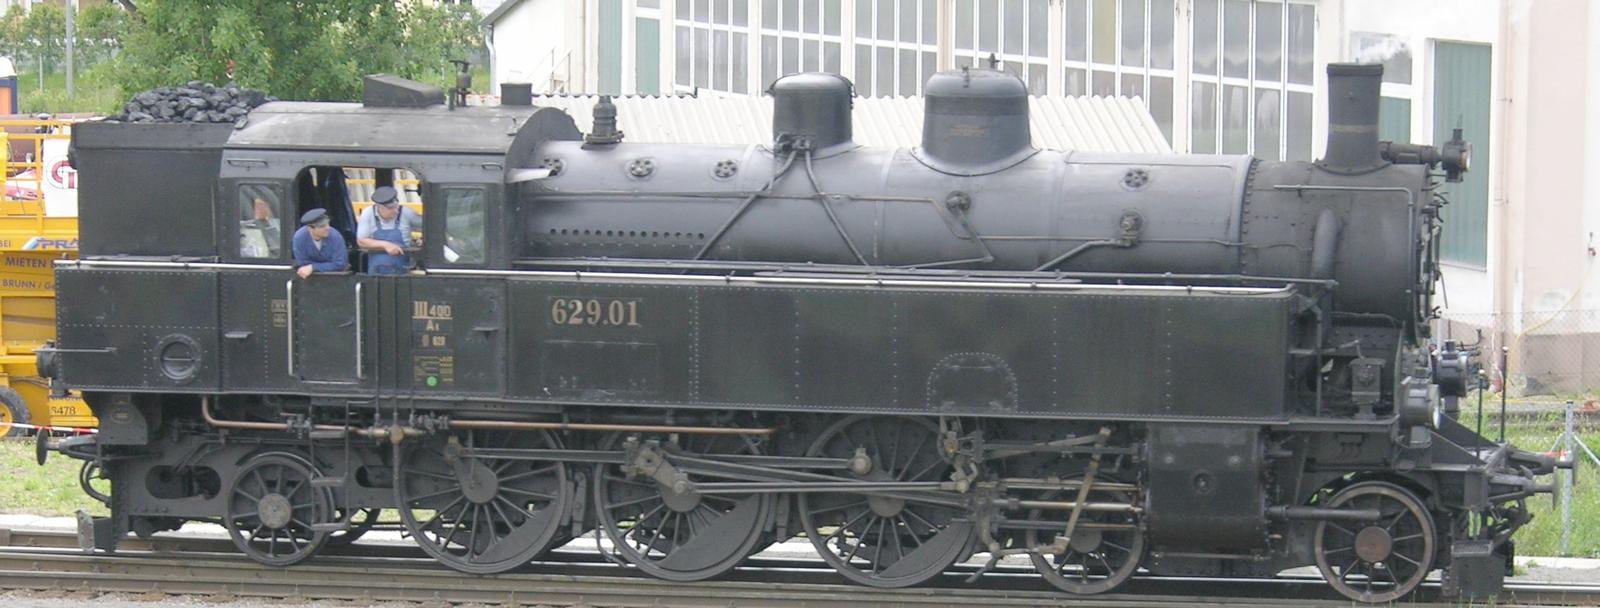 629.01 in May 2007 at the Köflacher station in Graz